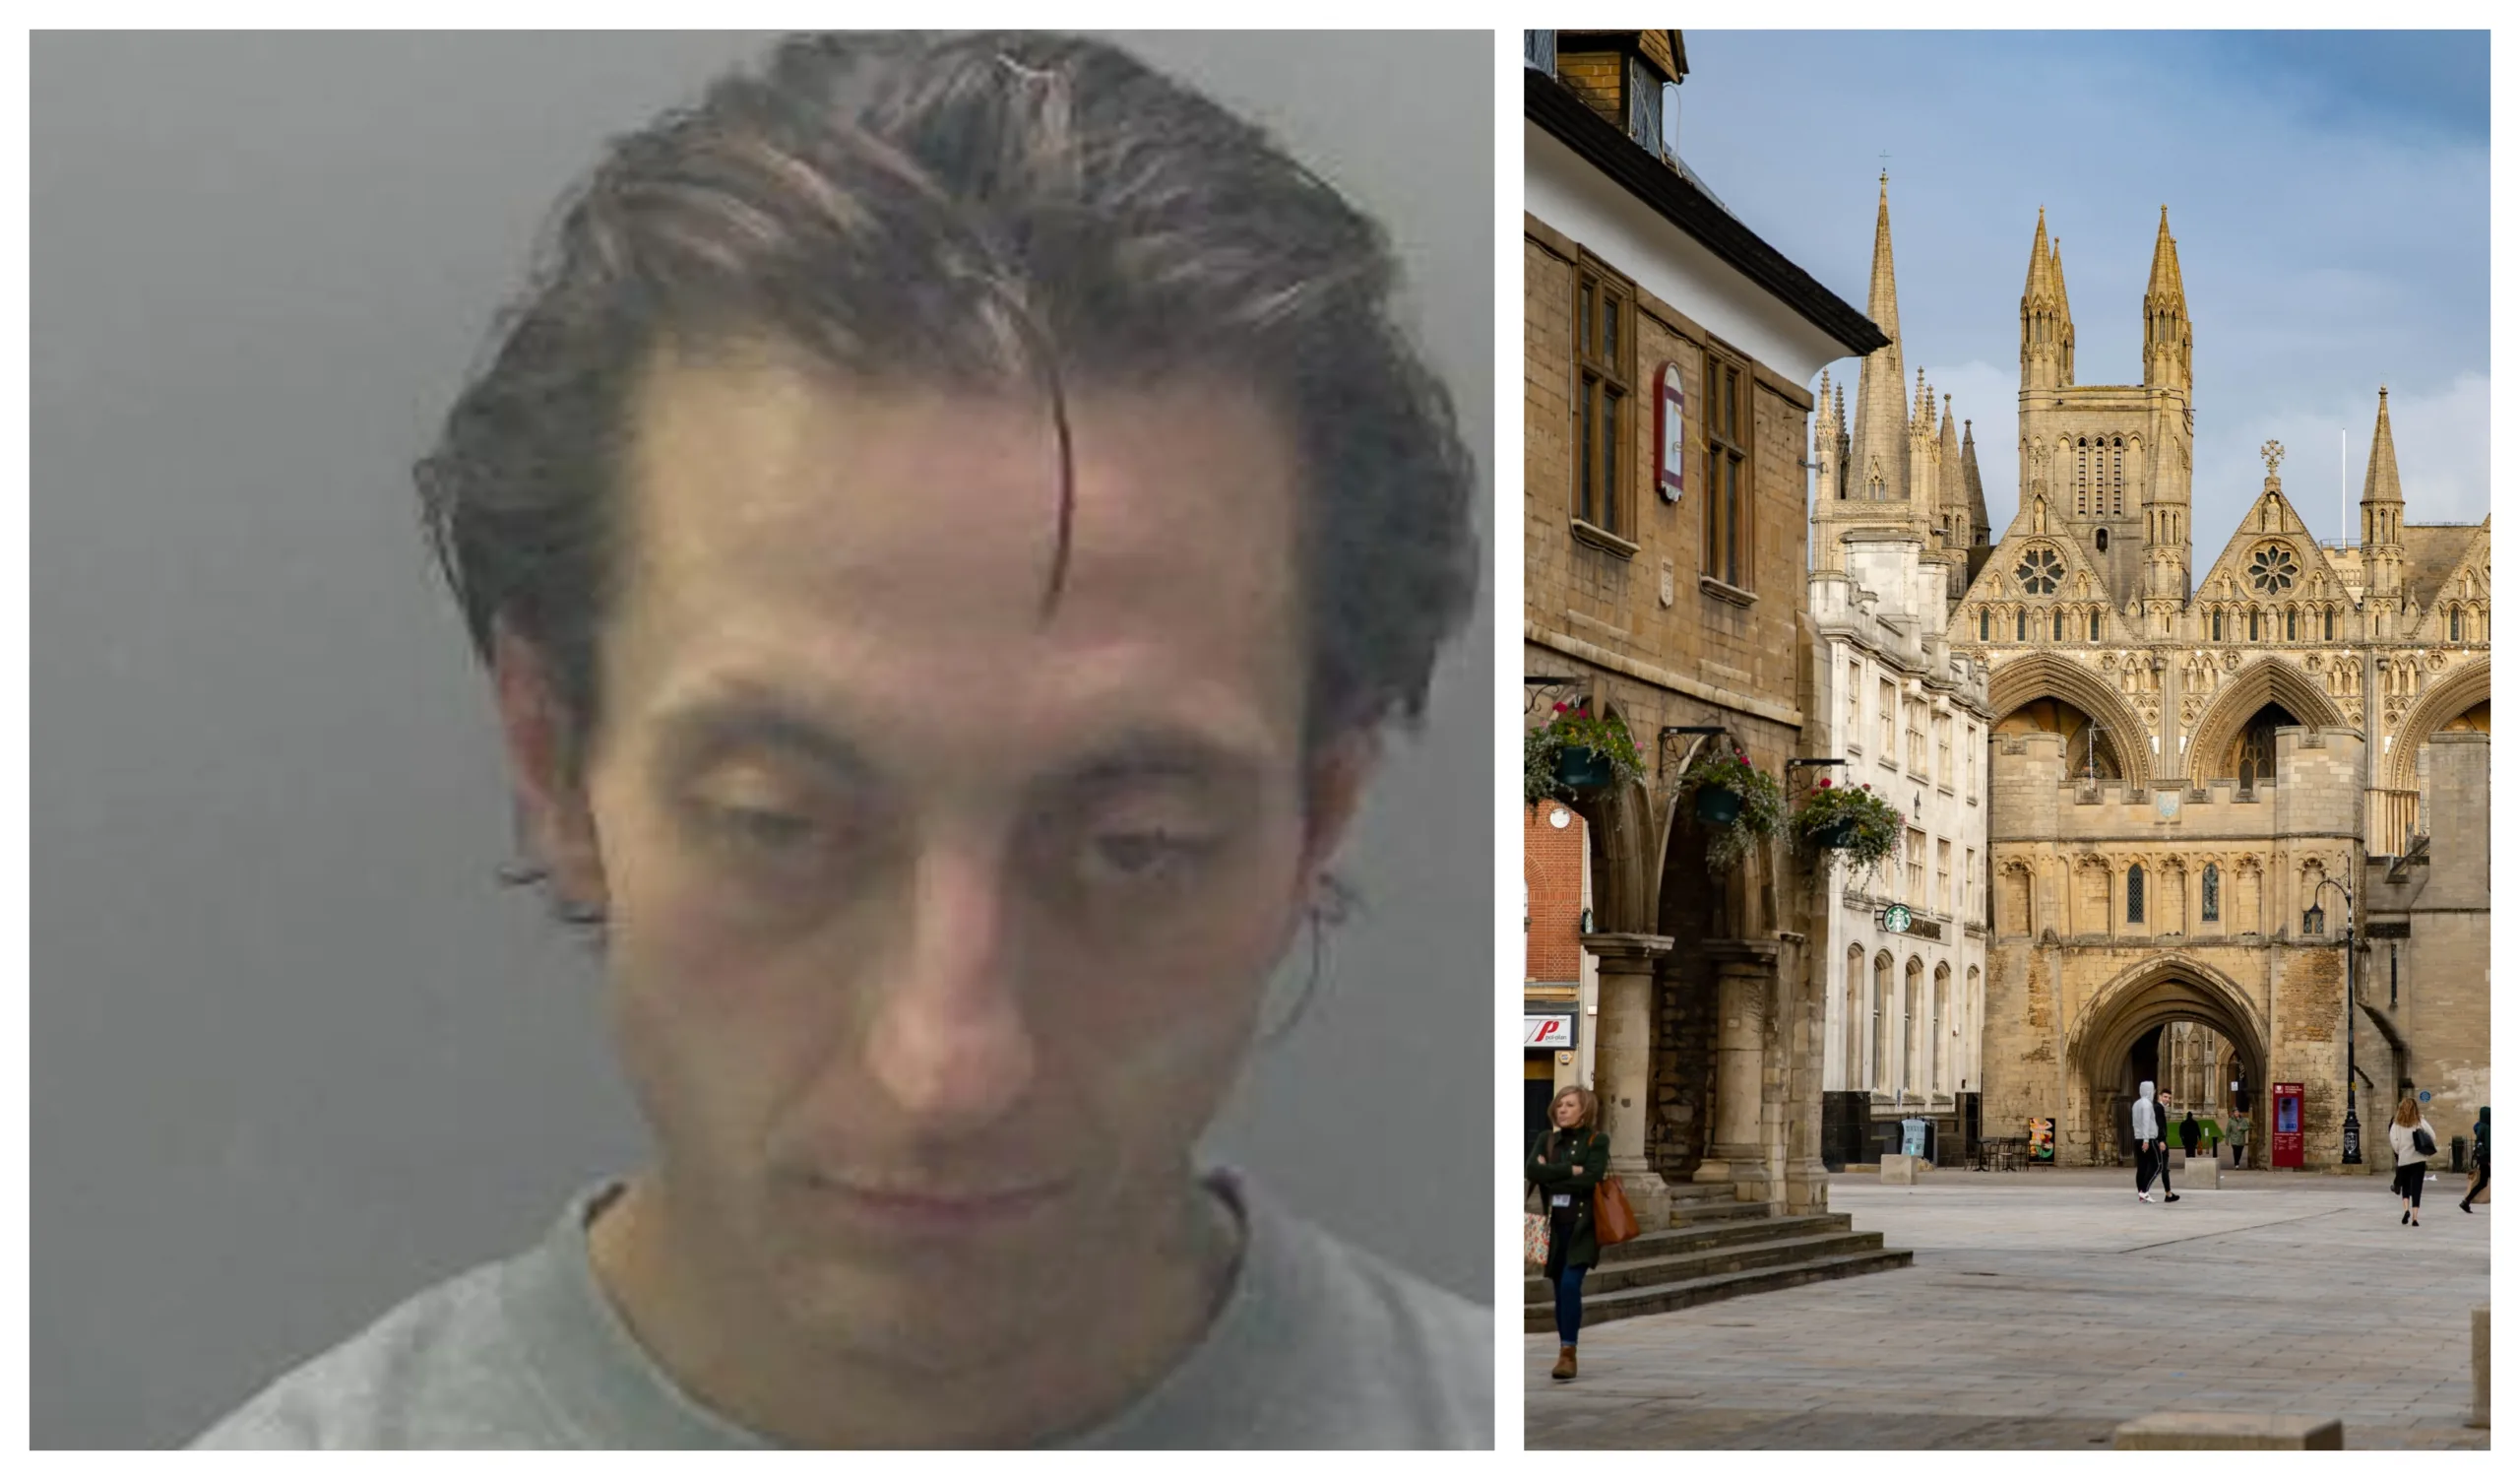 Mark King, 34, stole an HP laptop, Samsung mobile phone, Apple watch, a metal card wallet and £5 from a flat inside King’s Gate House, in Cowgate, Peterborough. A vigilant landlord later recognised him in the city centre, and he was arrested.